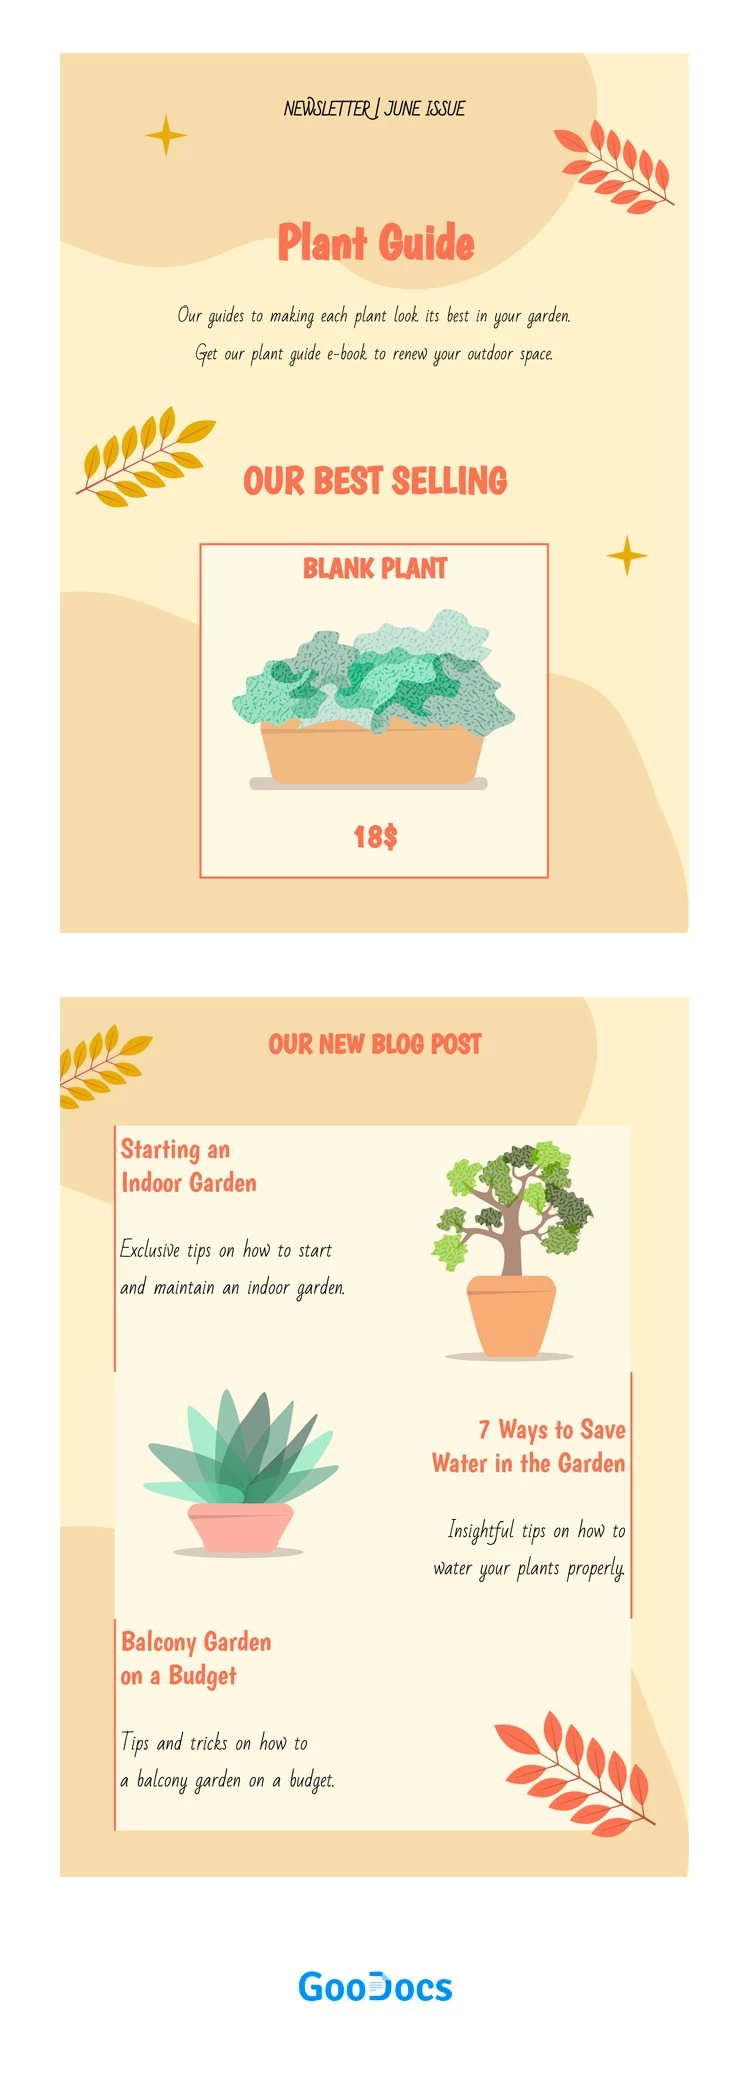 Plant Guide Newsletter - free Google Docs Template - 10061964